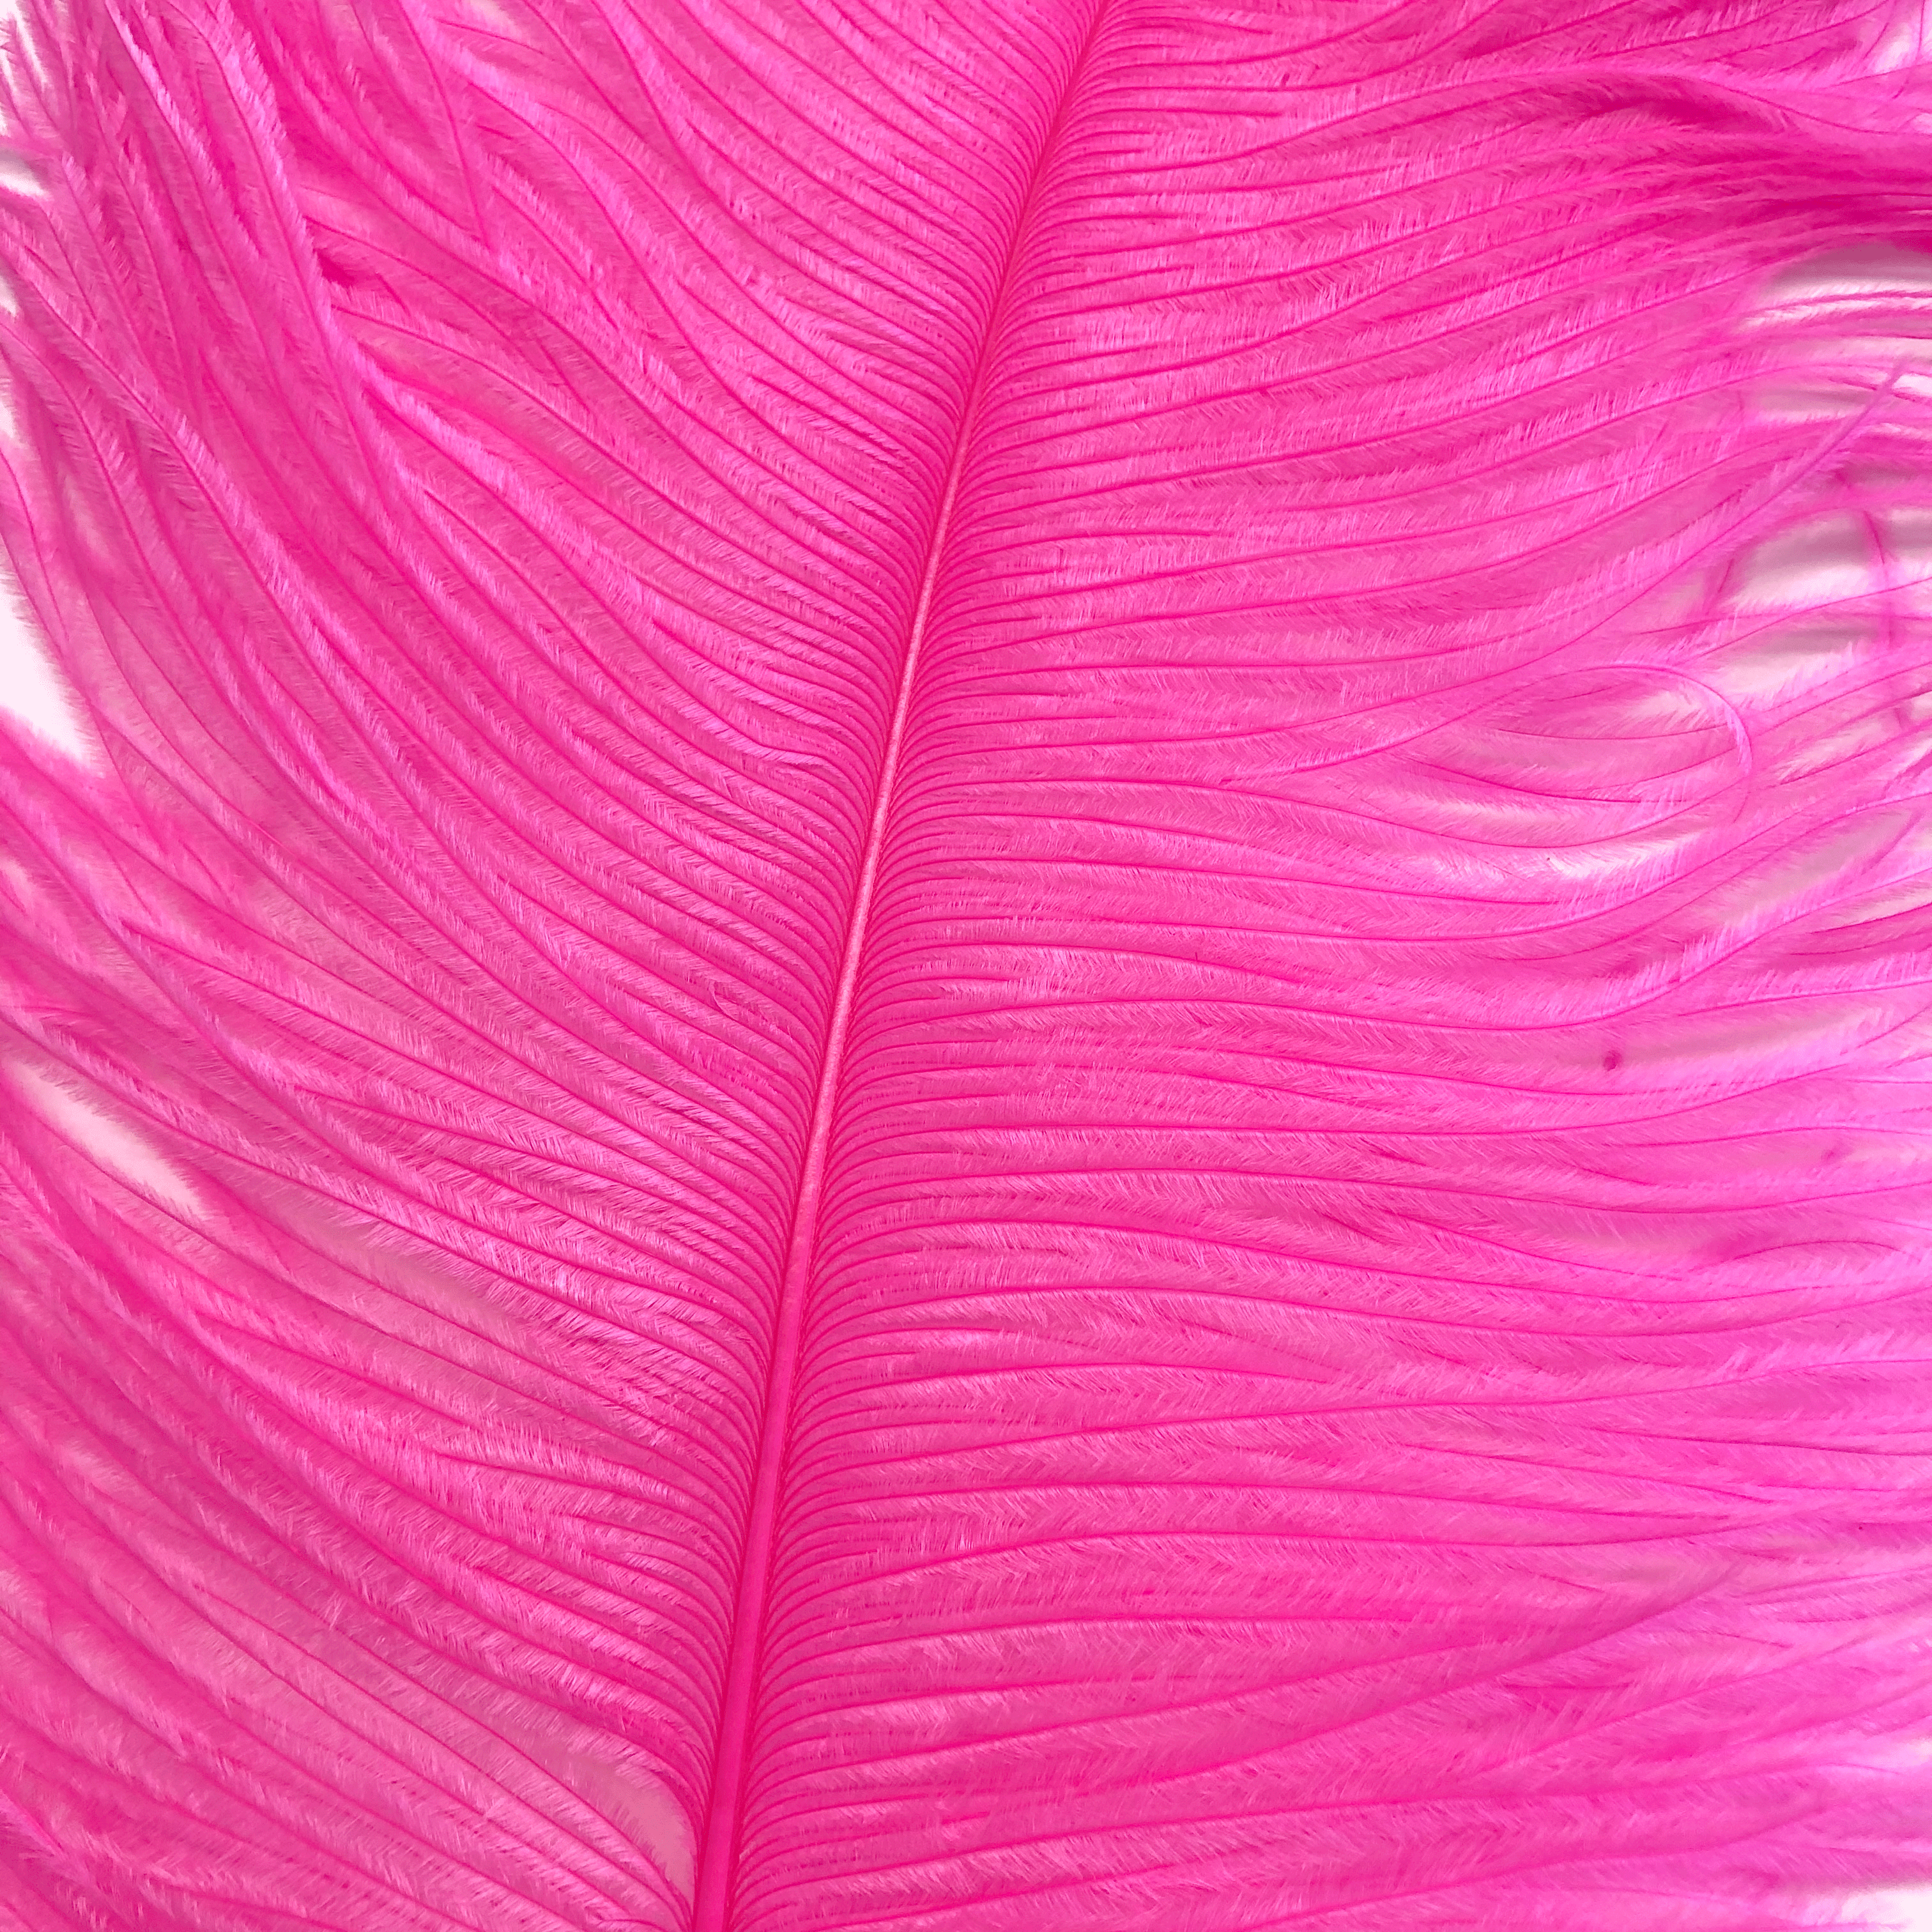 Ostrich Wing Feather Plumes 30-35cm (12-14") - Hot Pink